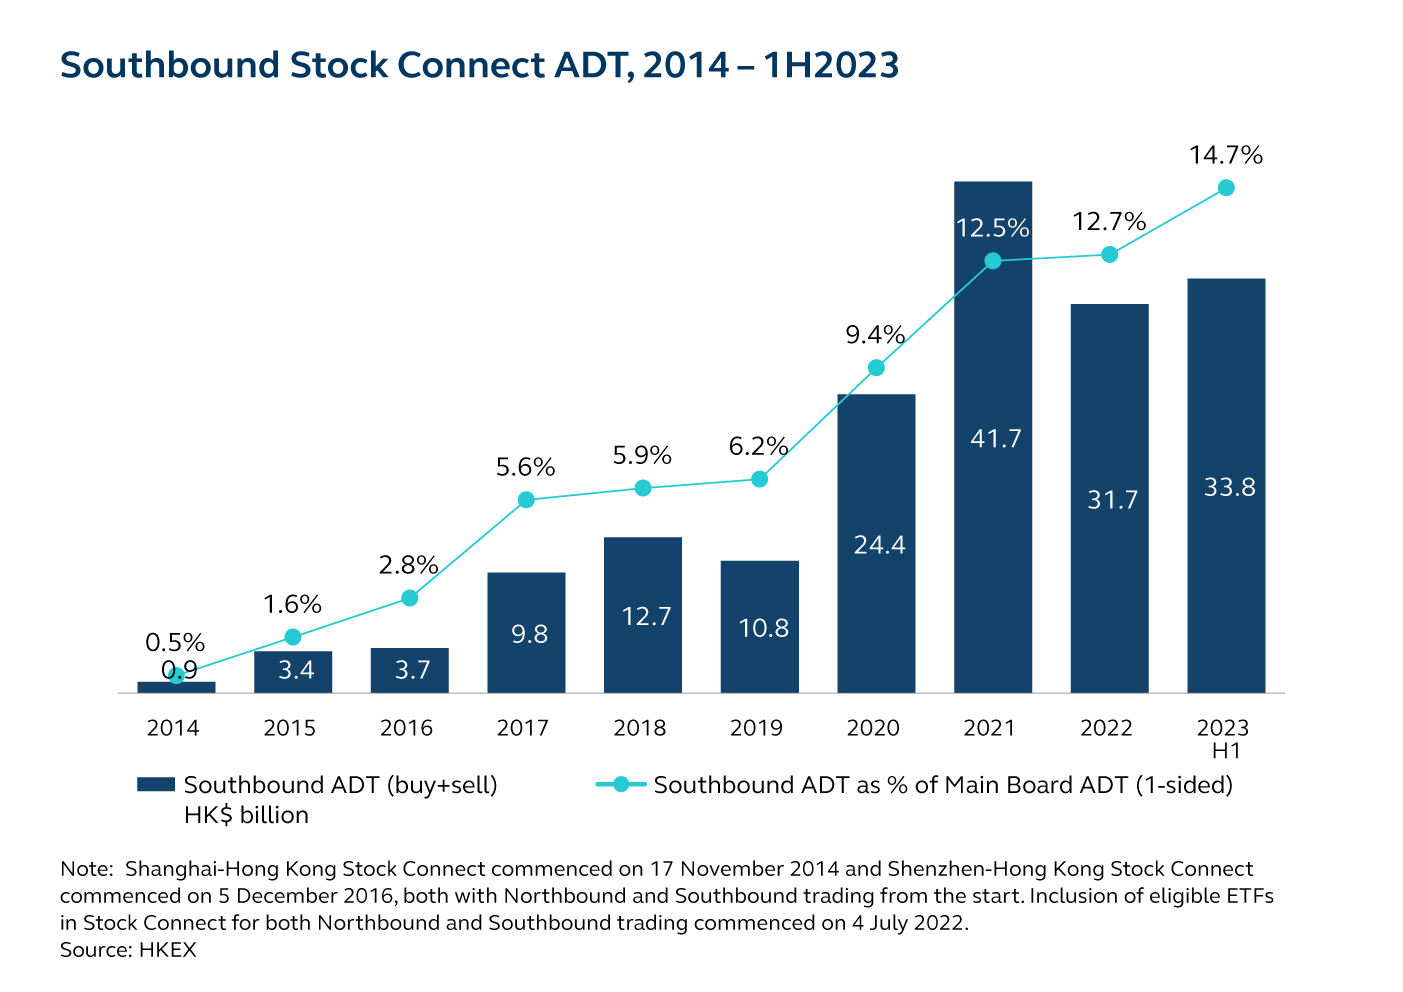 Southbound Stock Connect Average Daily Turnover between 2014 and 1H 2023, based on HKEx data